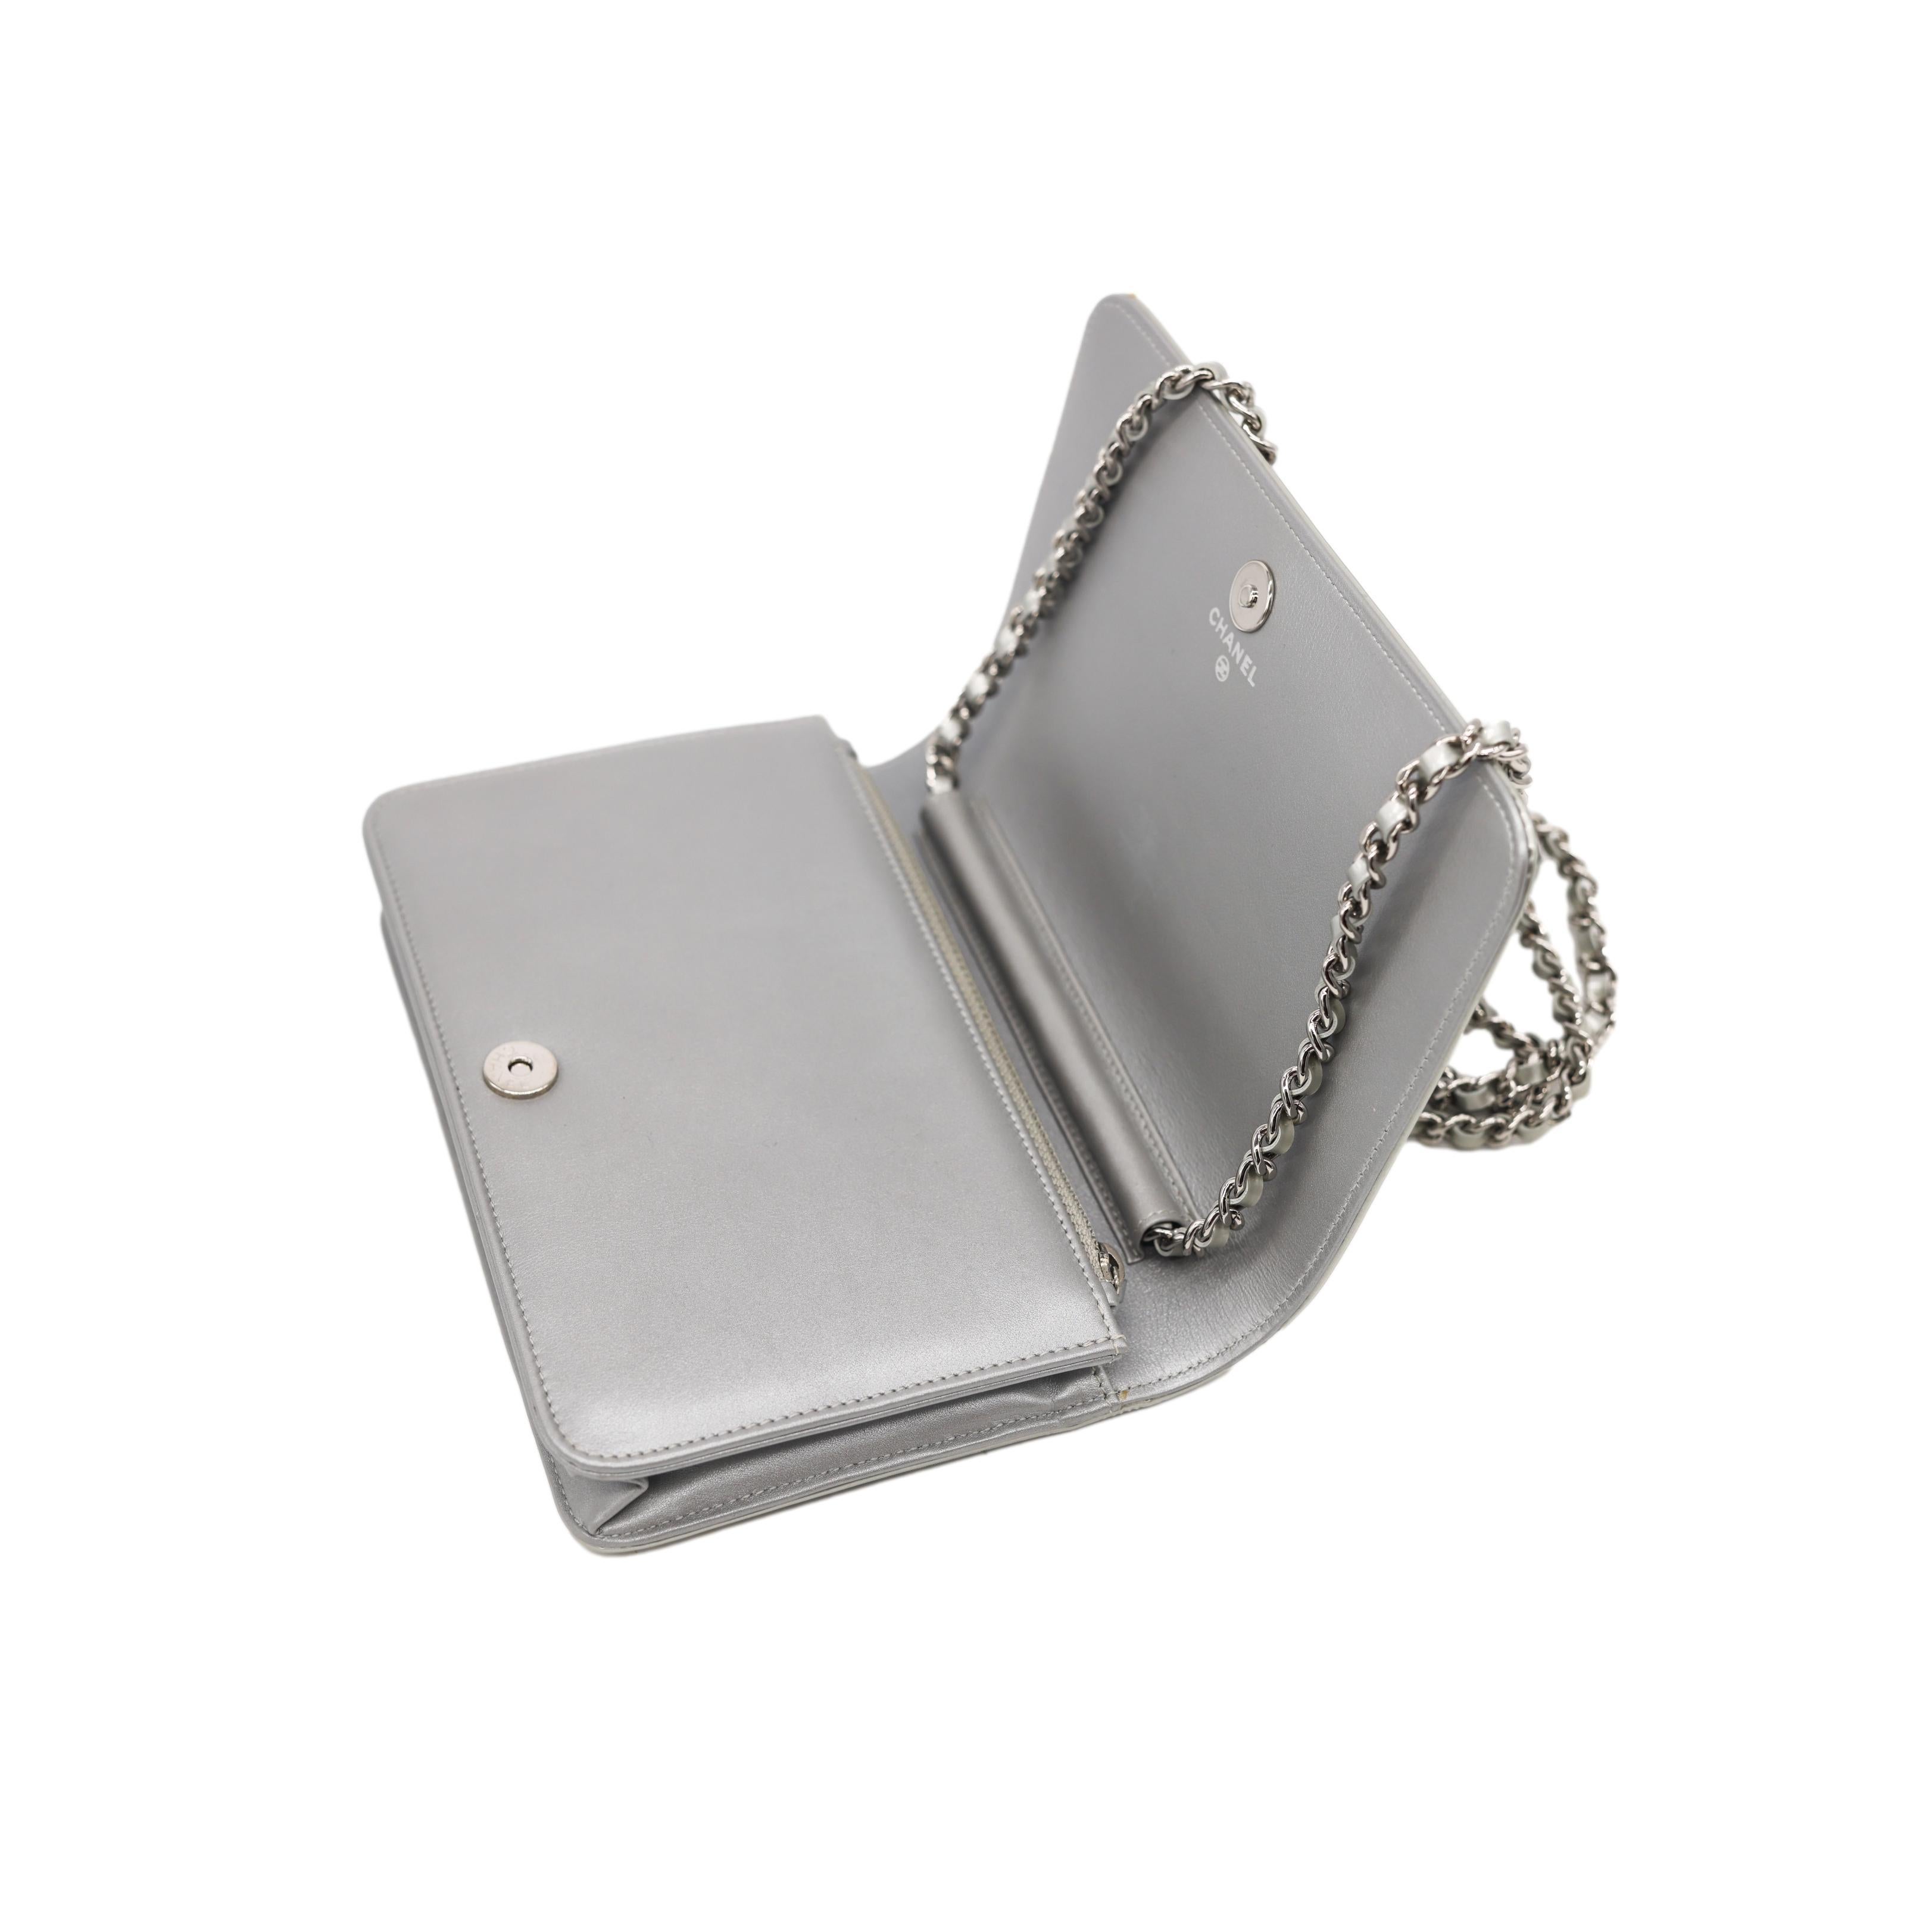 Chanel Silver Patent Leather Strass Wallet on Chain Clutch Crossbody Bag, 2009. 7